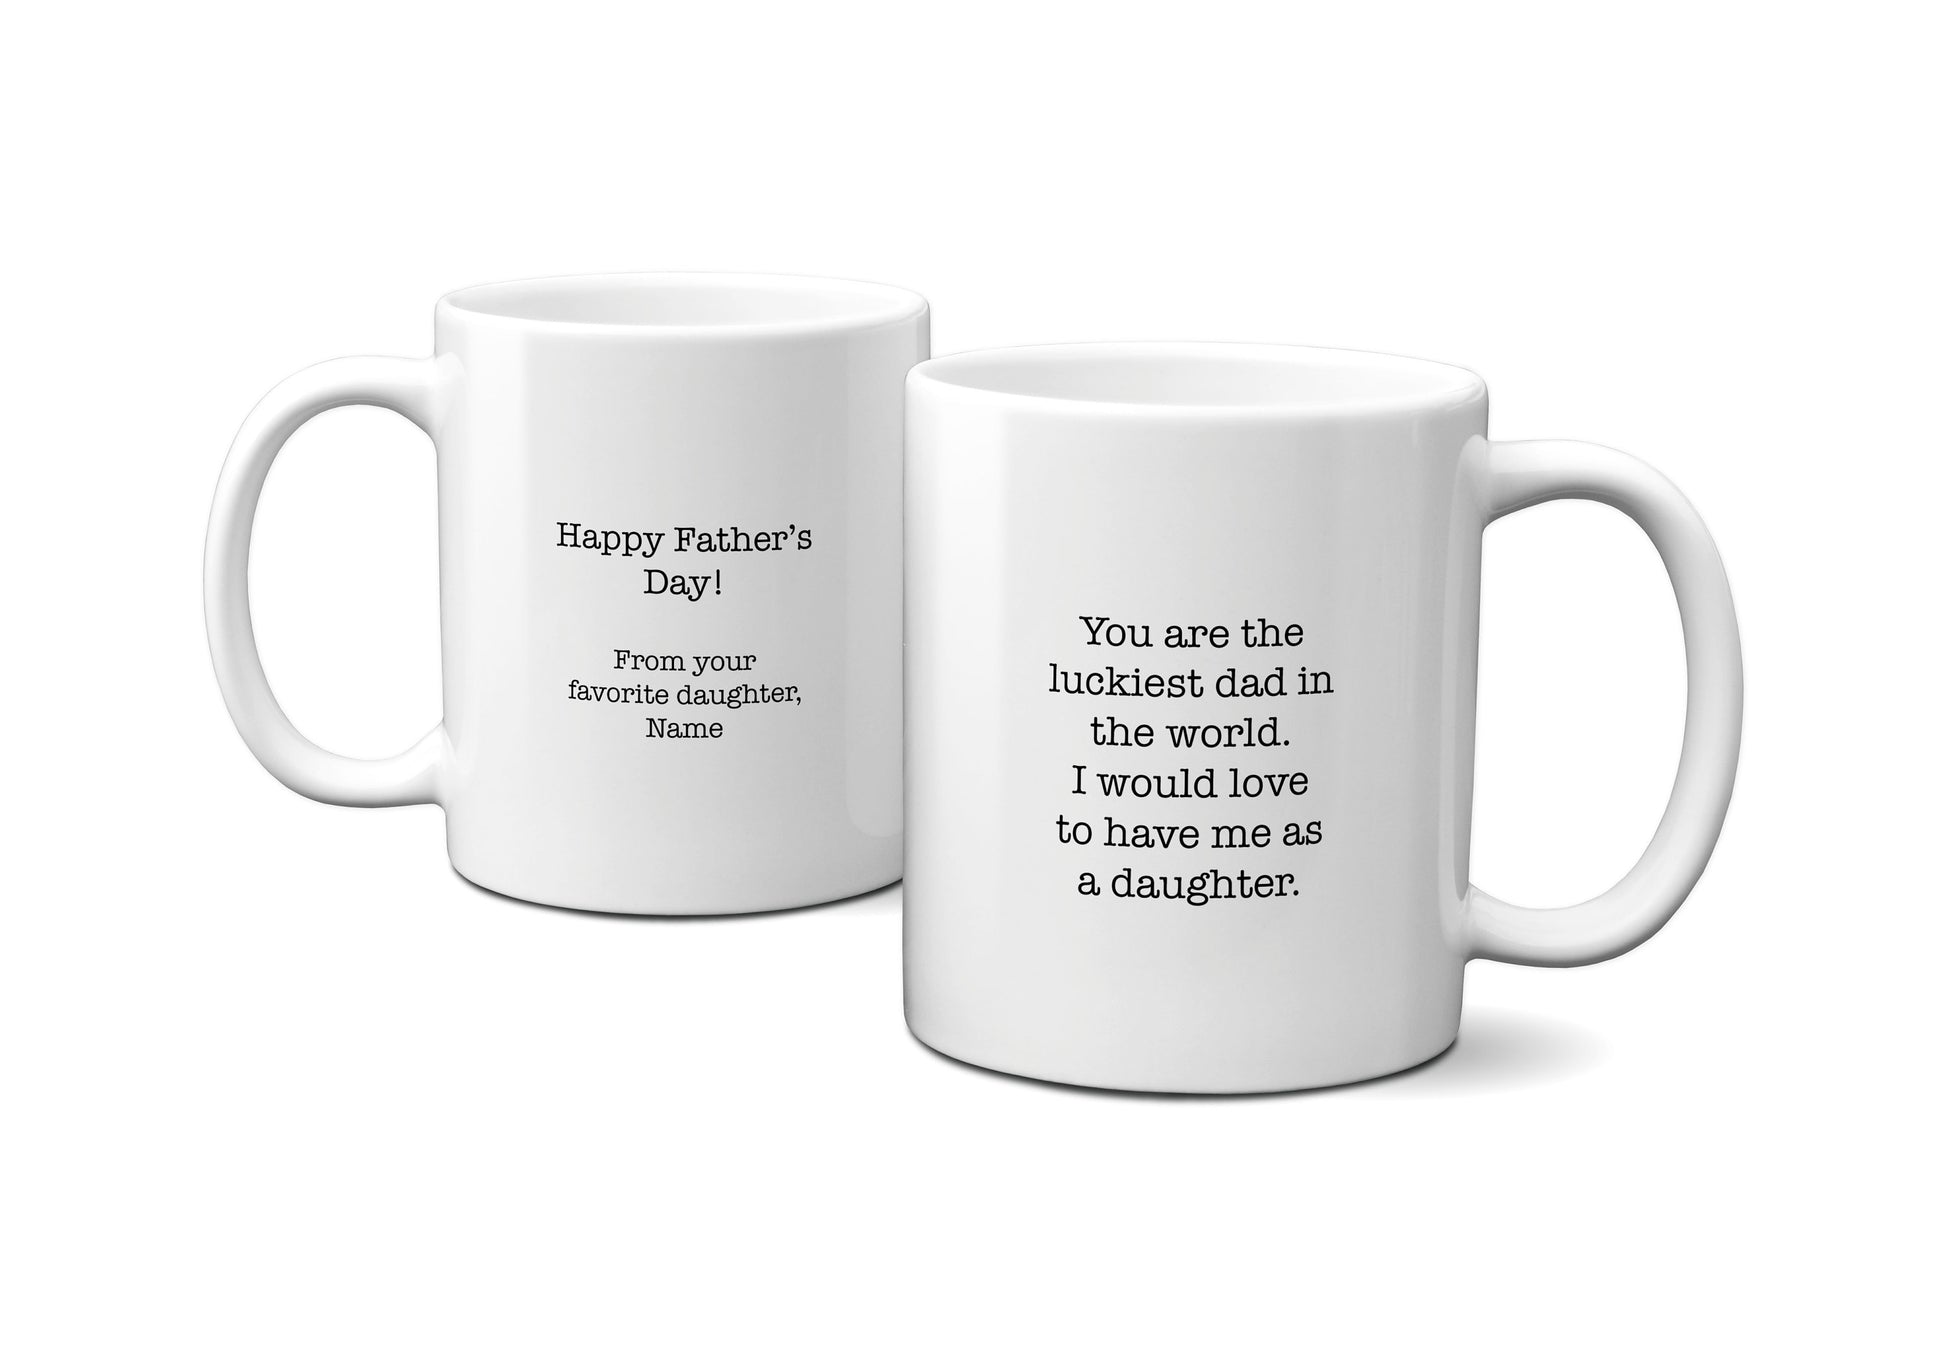 Super Dad My Hero Father's Day Gift Ideas, Personalized Gifts for Dad Coffee Mug, Dad Gift Birthday Mug